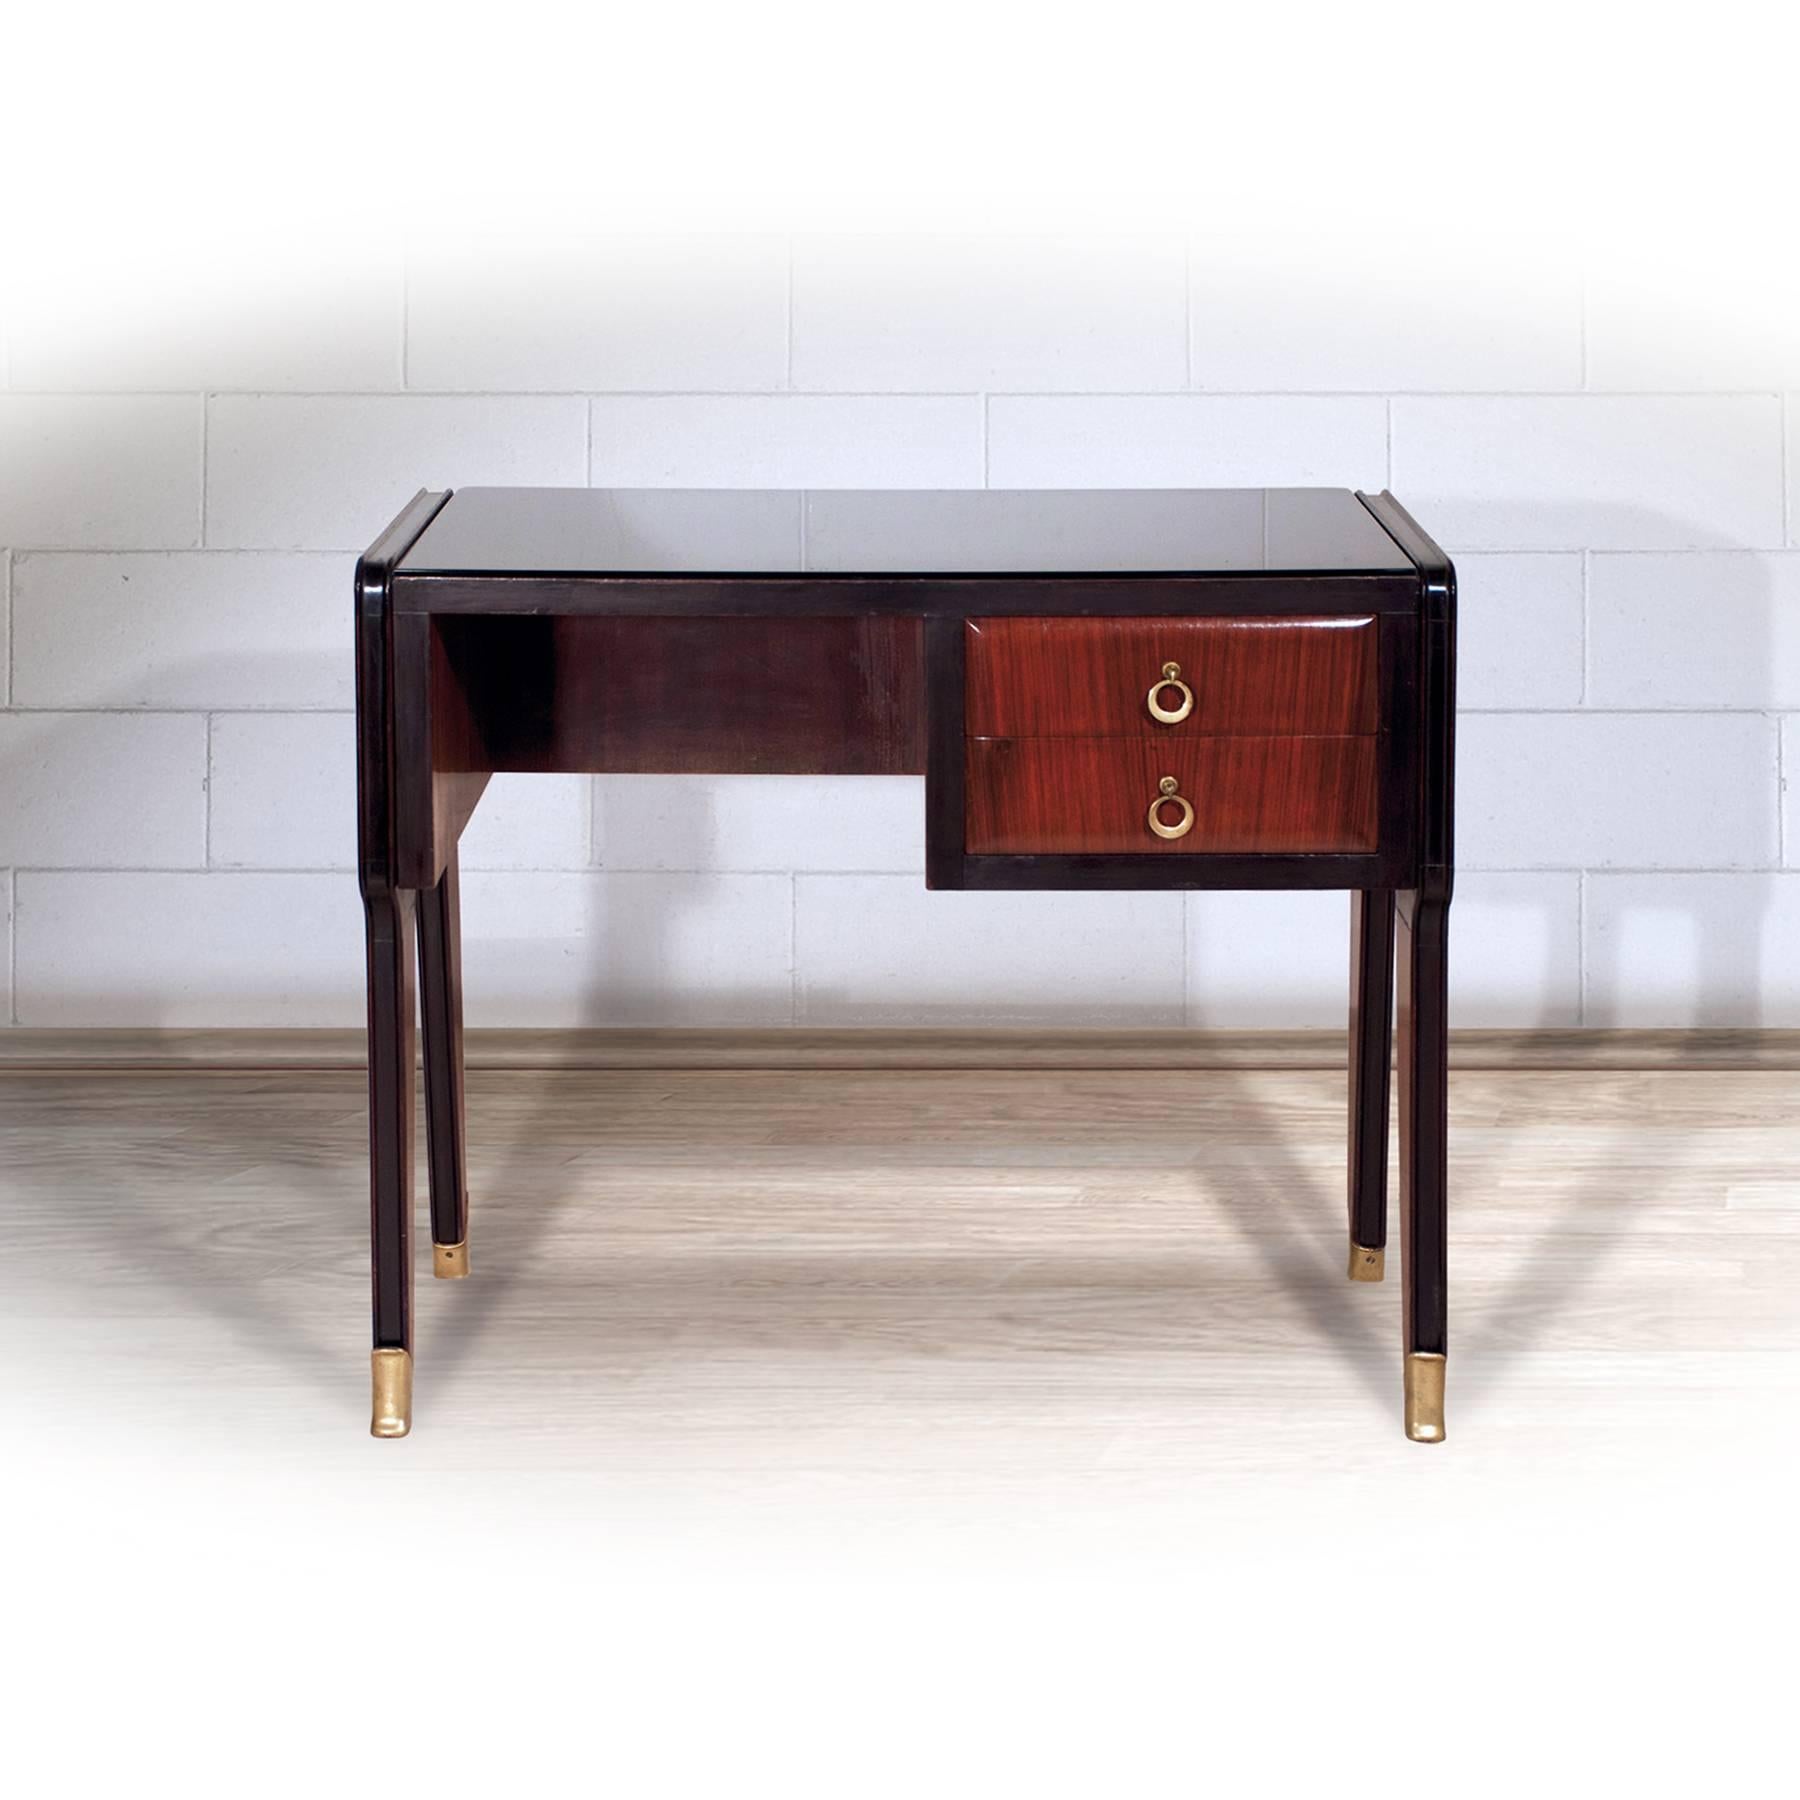 A small rosewood writing desk designed by Vittorio Dassi in the 1950s, with dusky black glass top, two drawers with brass ring handles and feet with brass sabots.
It's in excellent condition of the period, recently restored and ready to use.
The